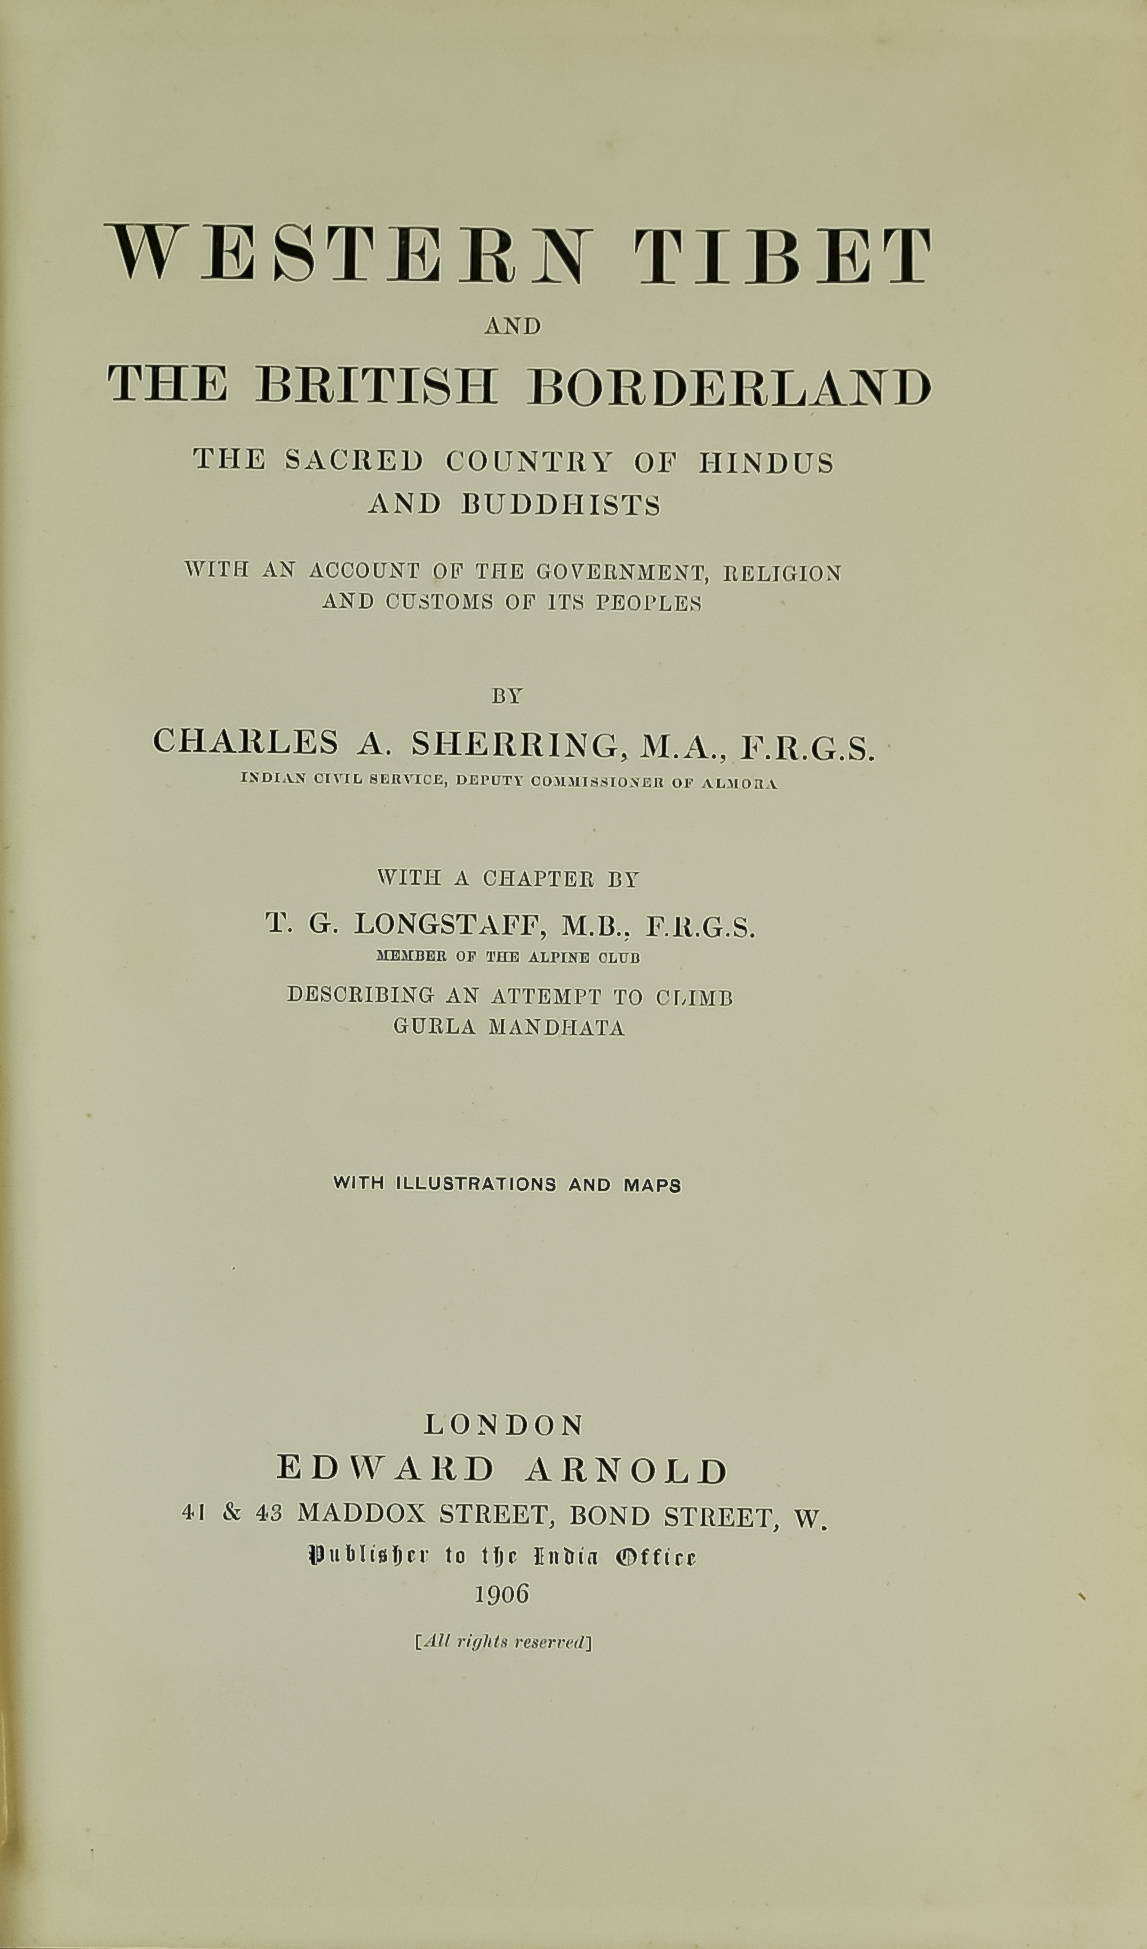 Charles A. Sherring - "Western Tibet and the British Borderland", published by Edward R. Arnold,